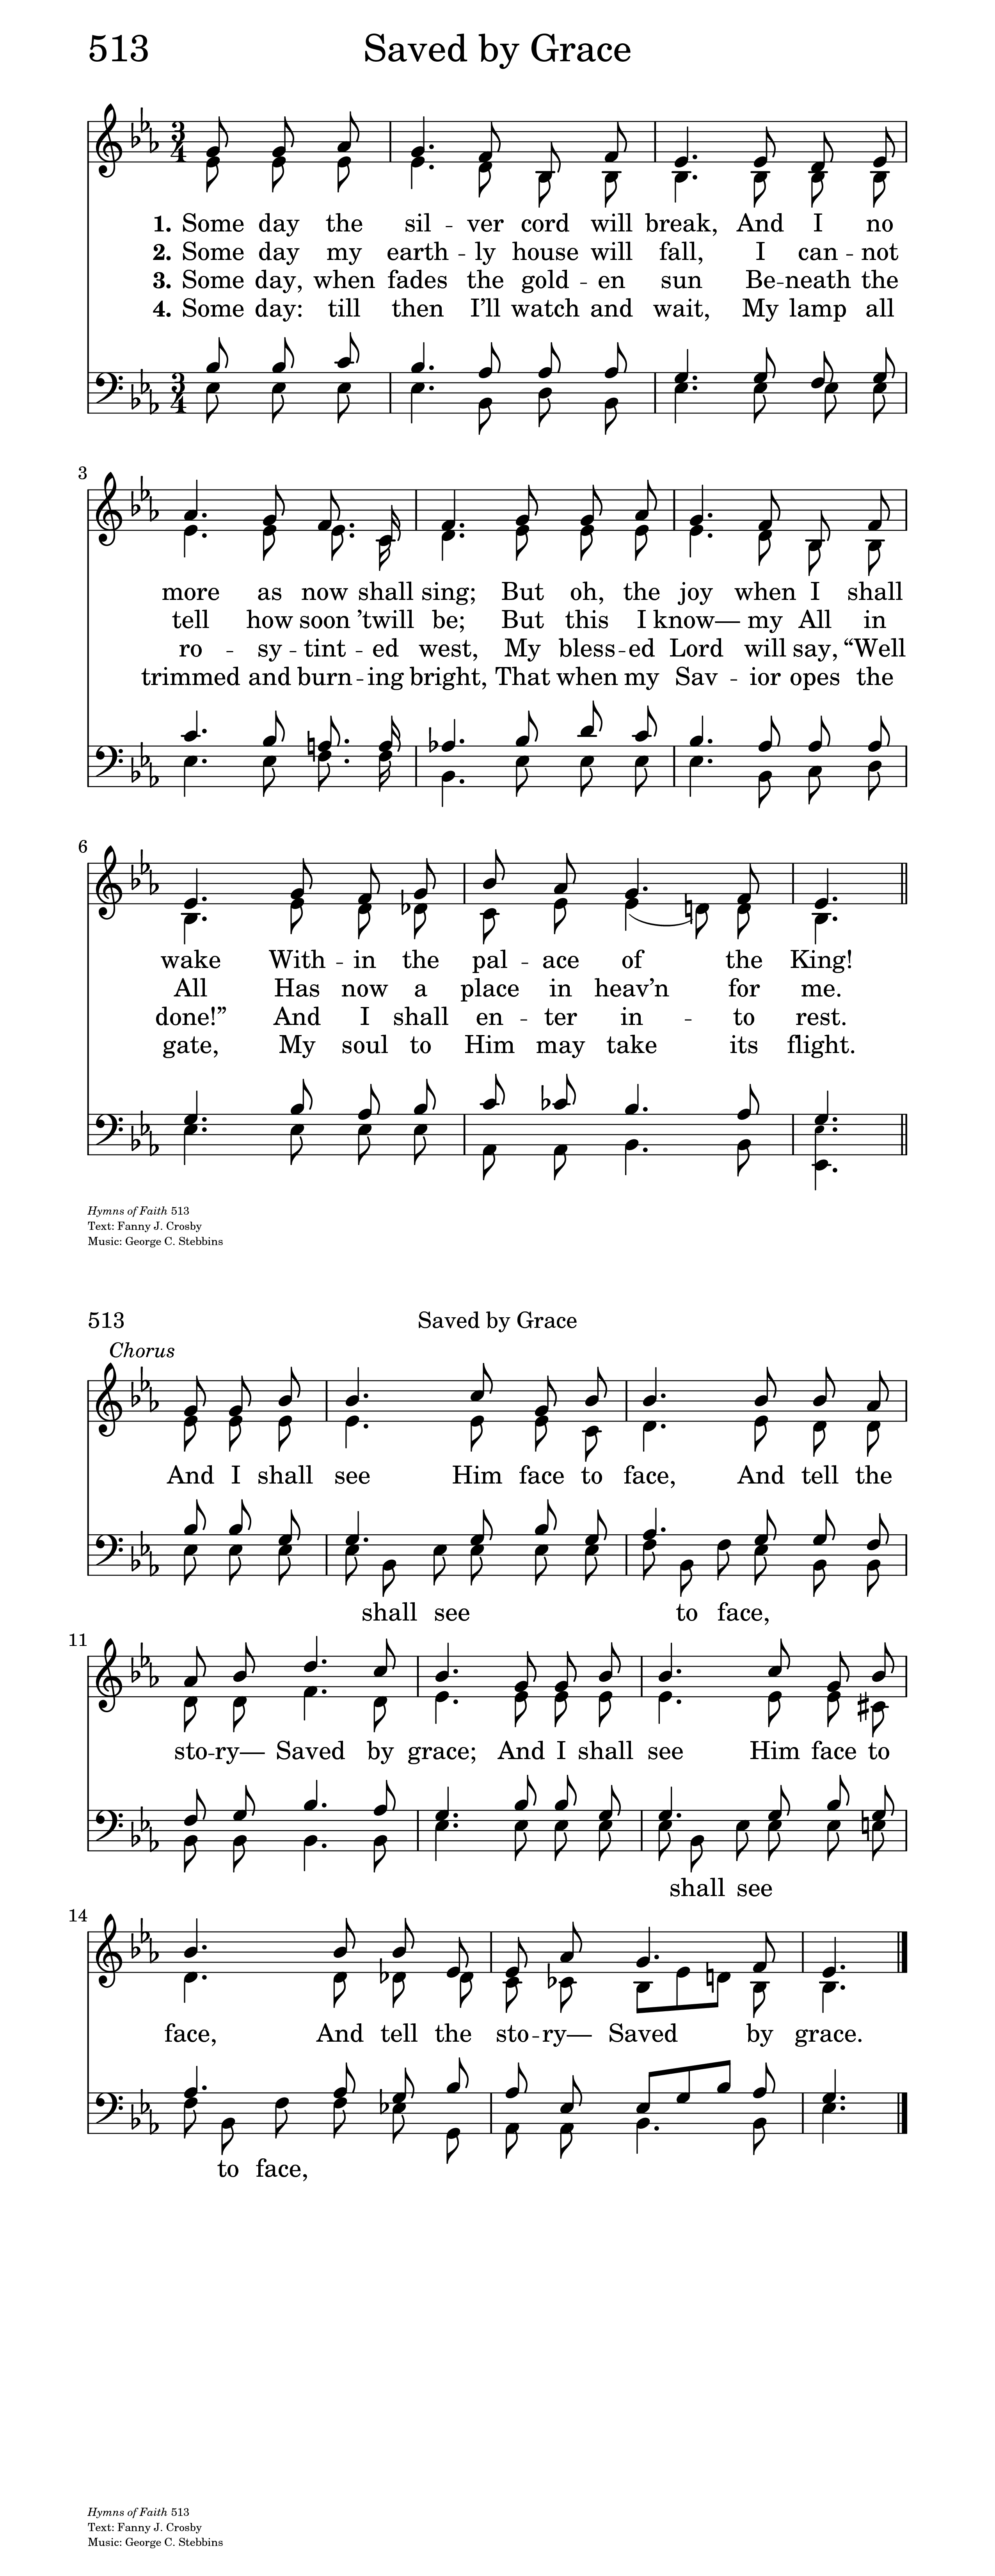 Saved By Grace | Hymnary.org